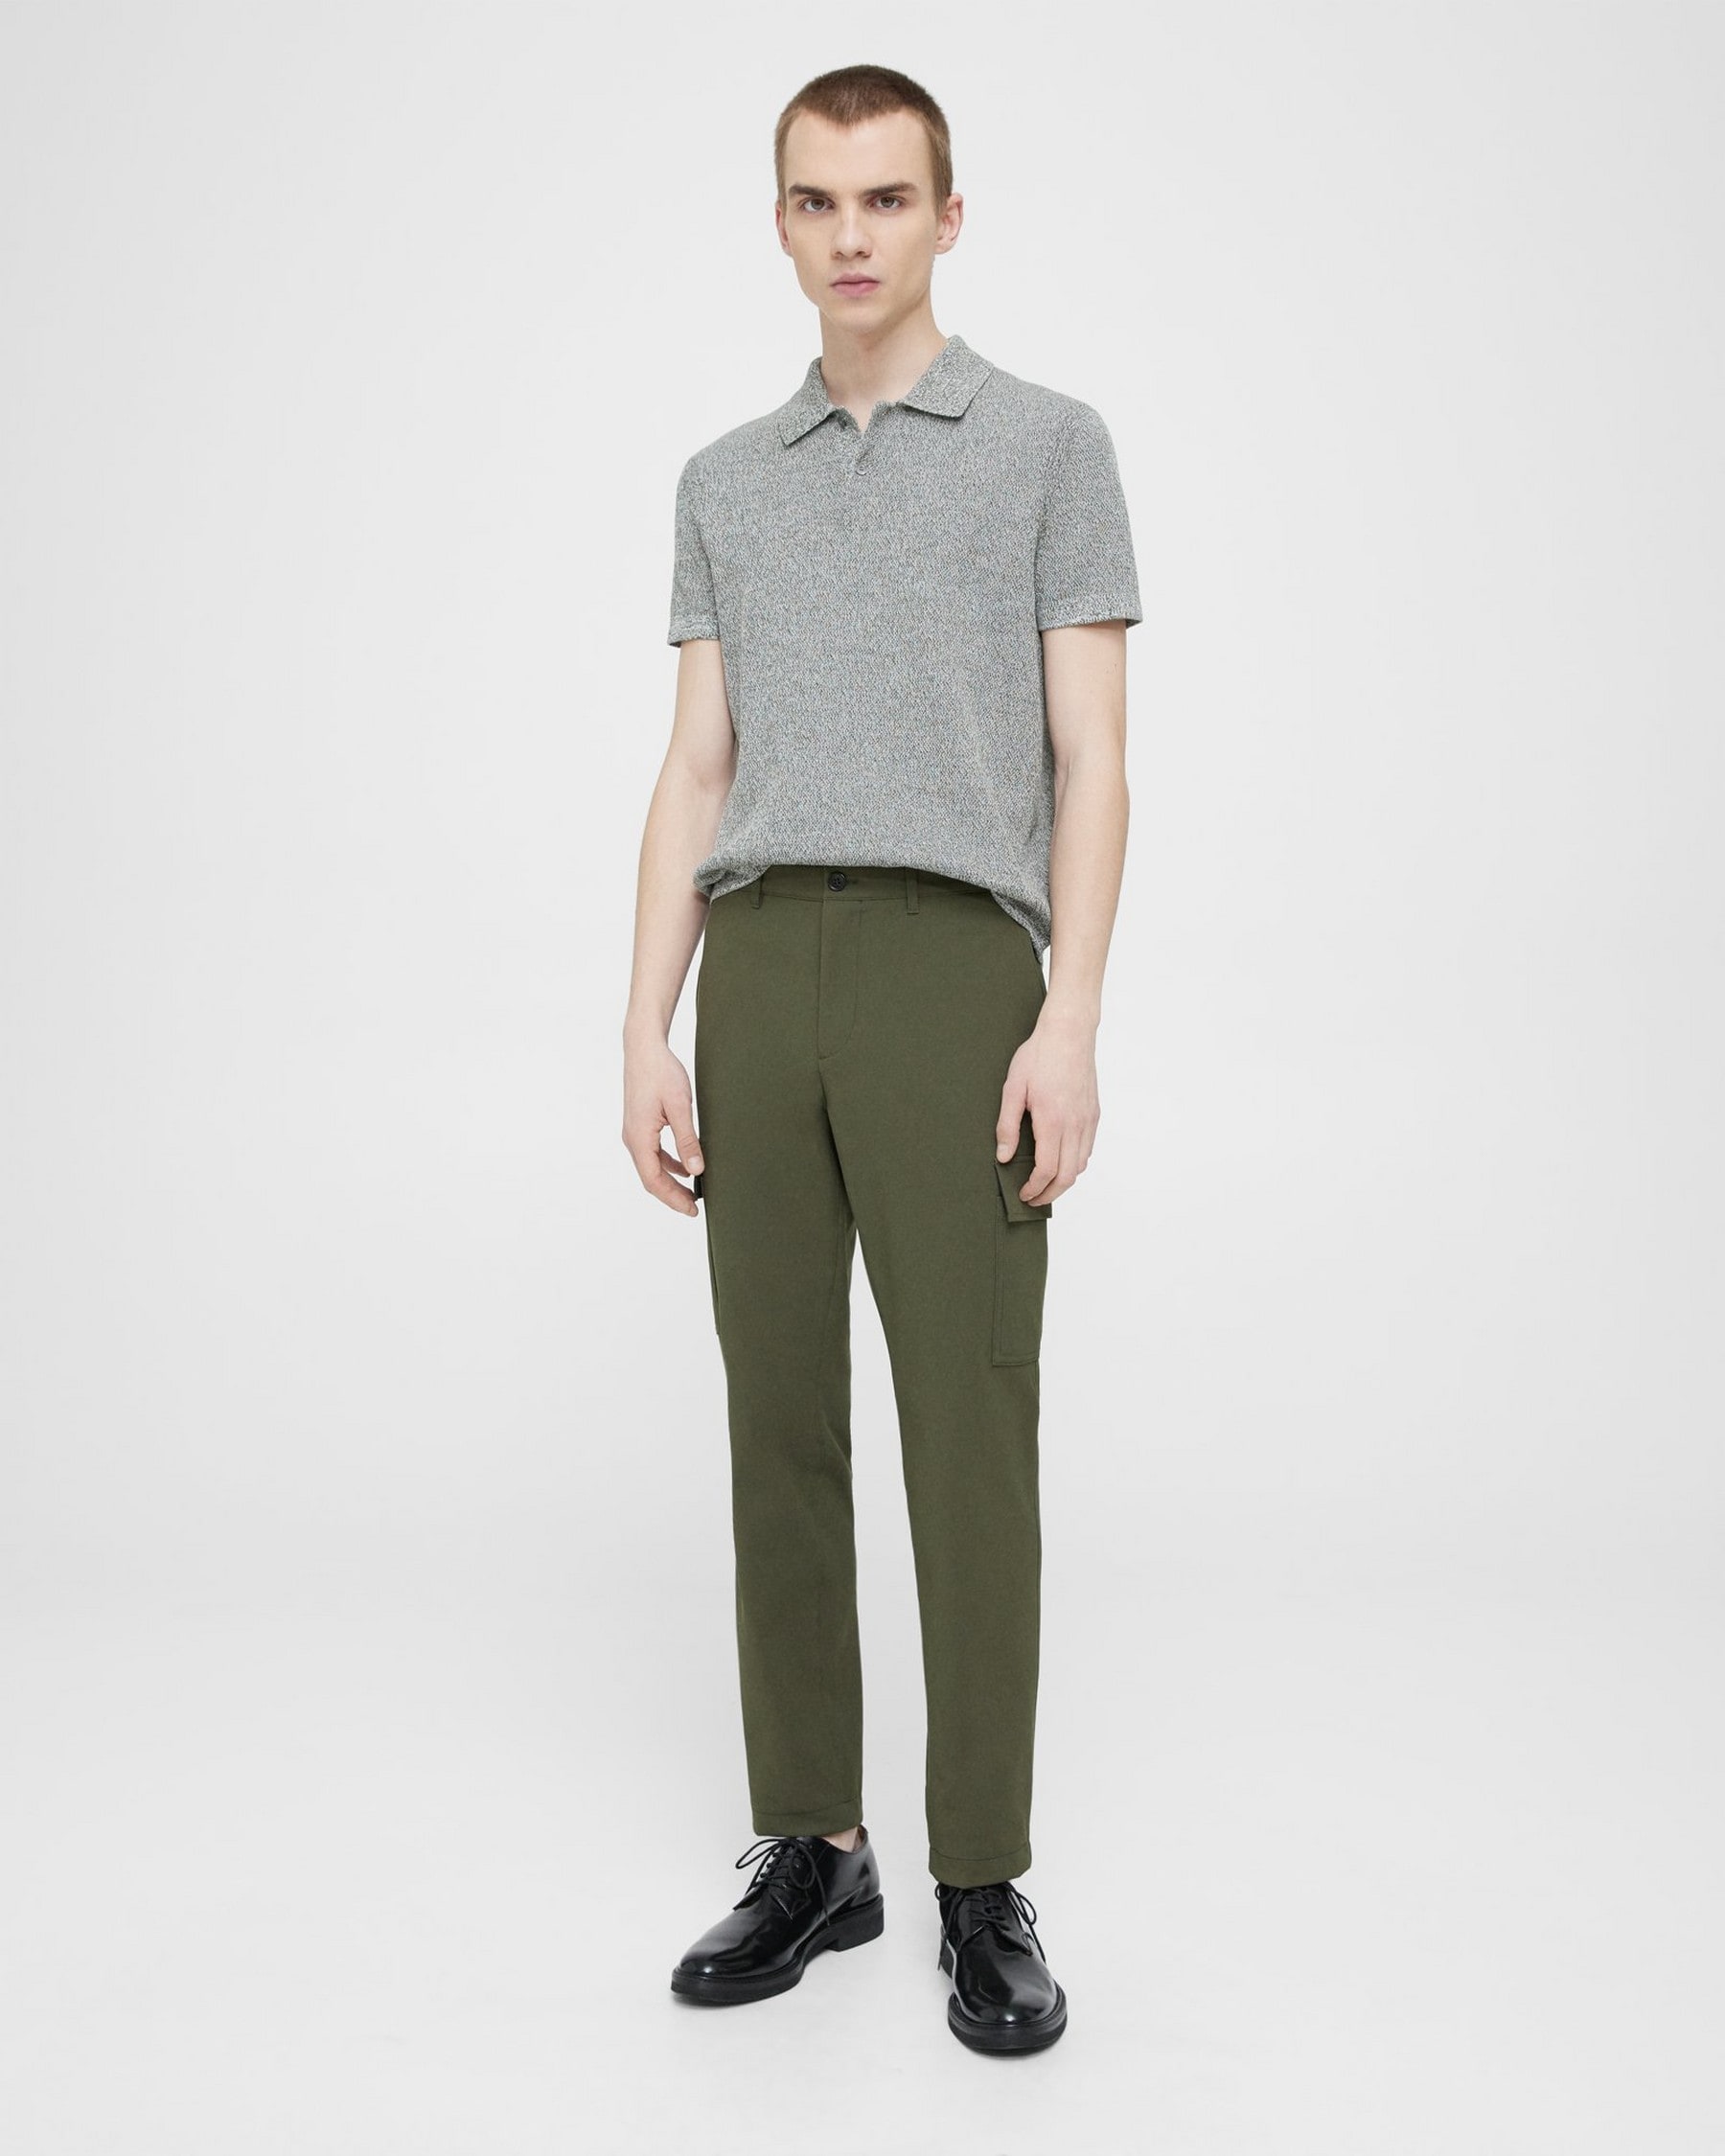 Theory Zaine Cargo Pant in Neoteric Twill